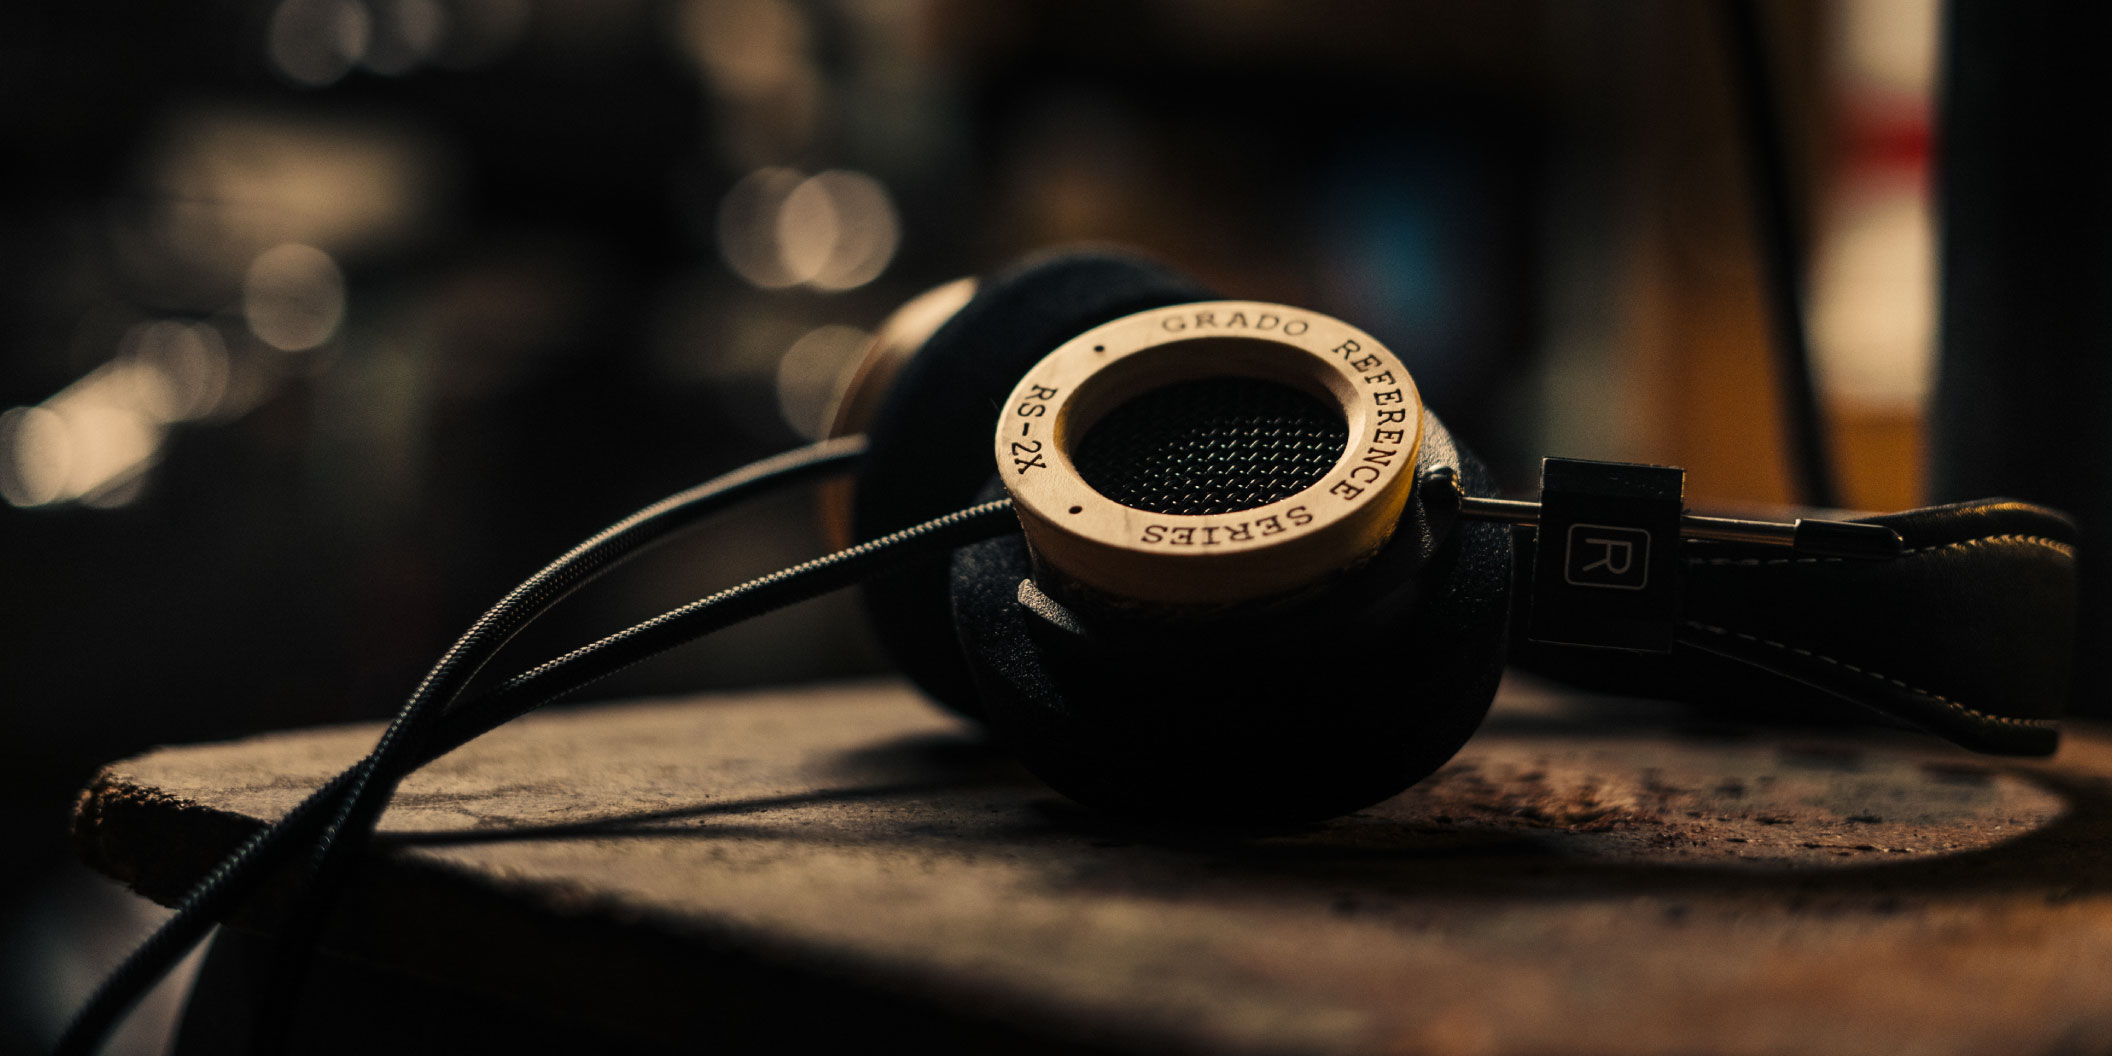 Photo of RS2S Headphones resting on a wooden table with a blurred background